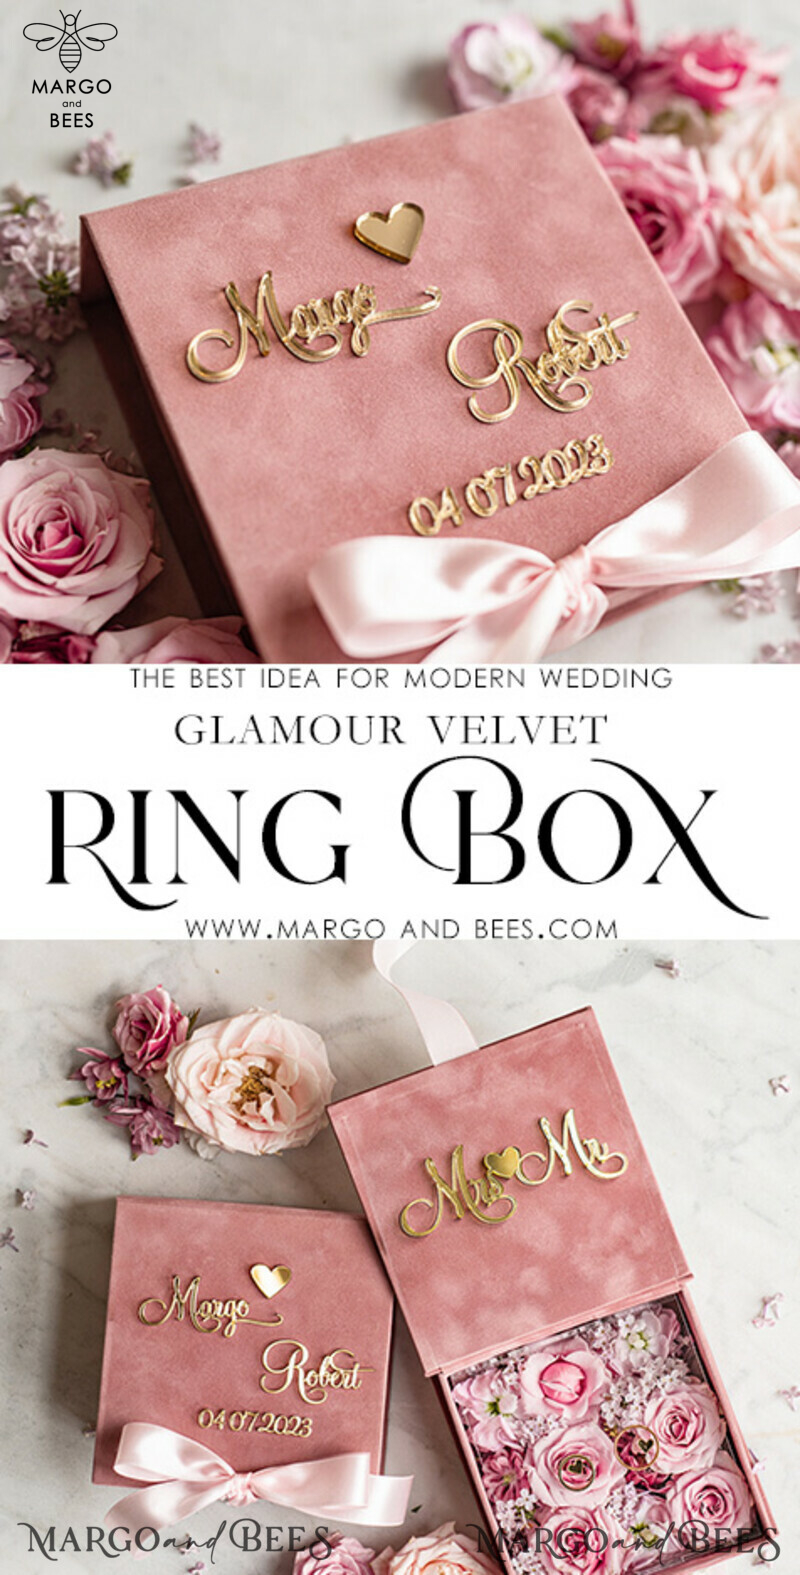 Luxury Blush Pink Golden Velvet Wedding Ring Box for Ceremony - Boho Glam His Hers Ring Boxes with Custom Colors-7